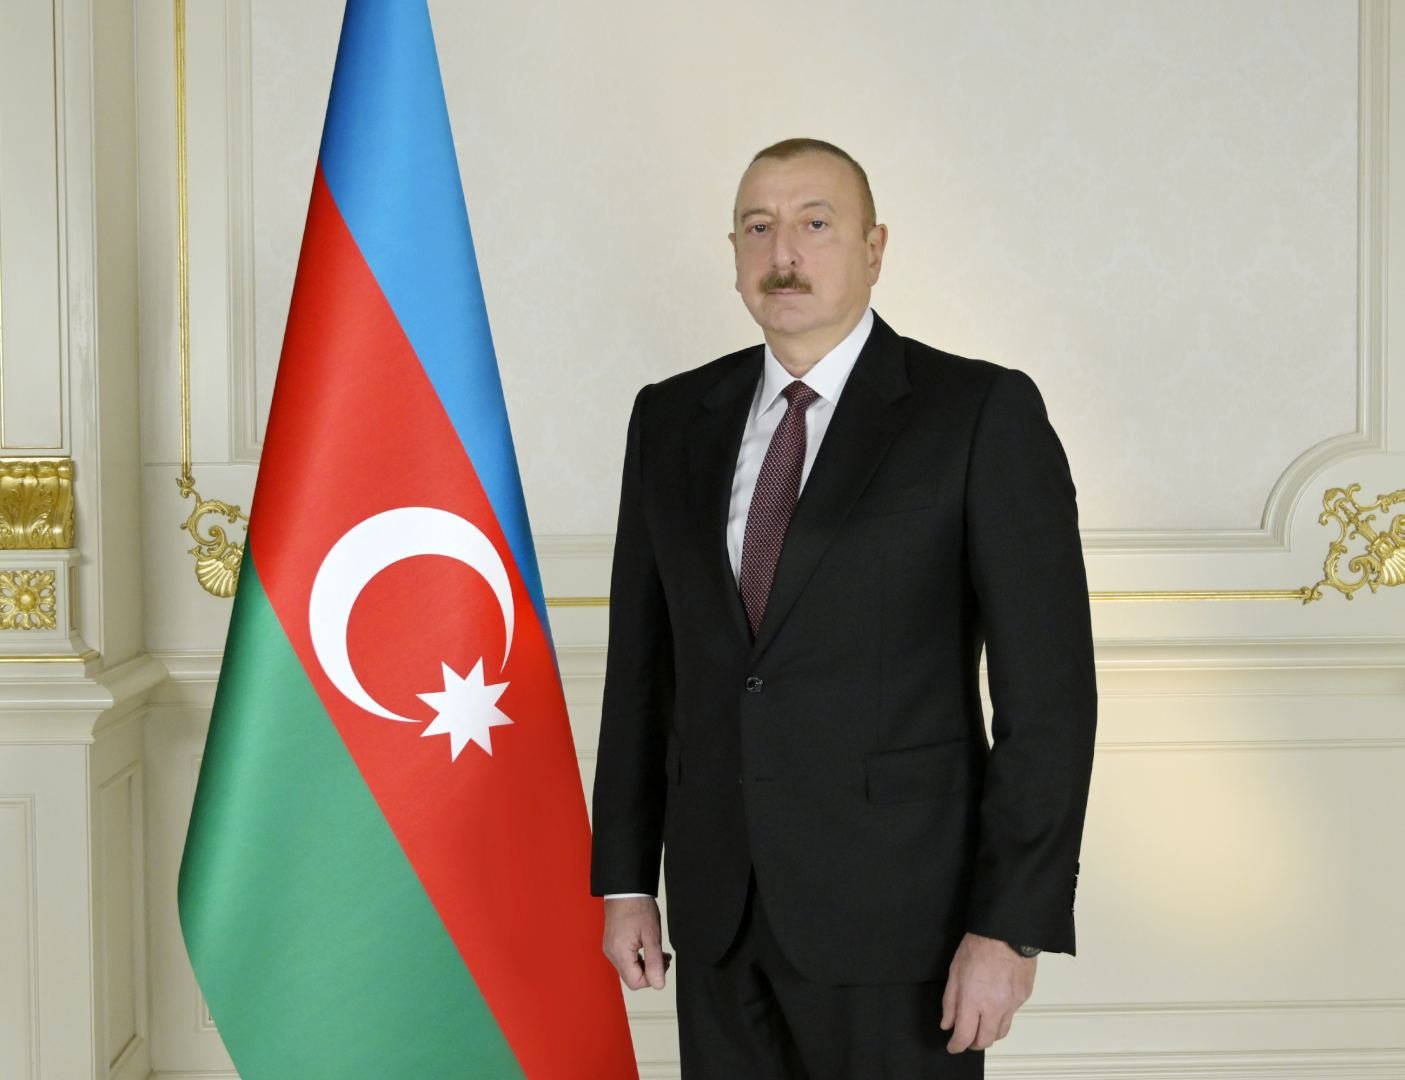 Karabakh Armenians must either accept Azerbaijani citizenship or find another place of residence - President Ilham Aliyev